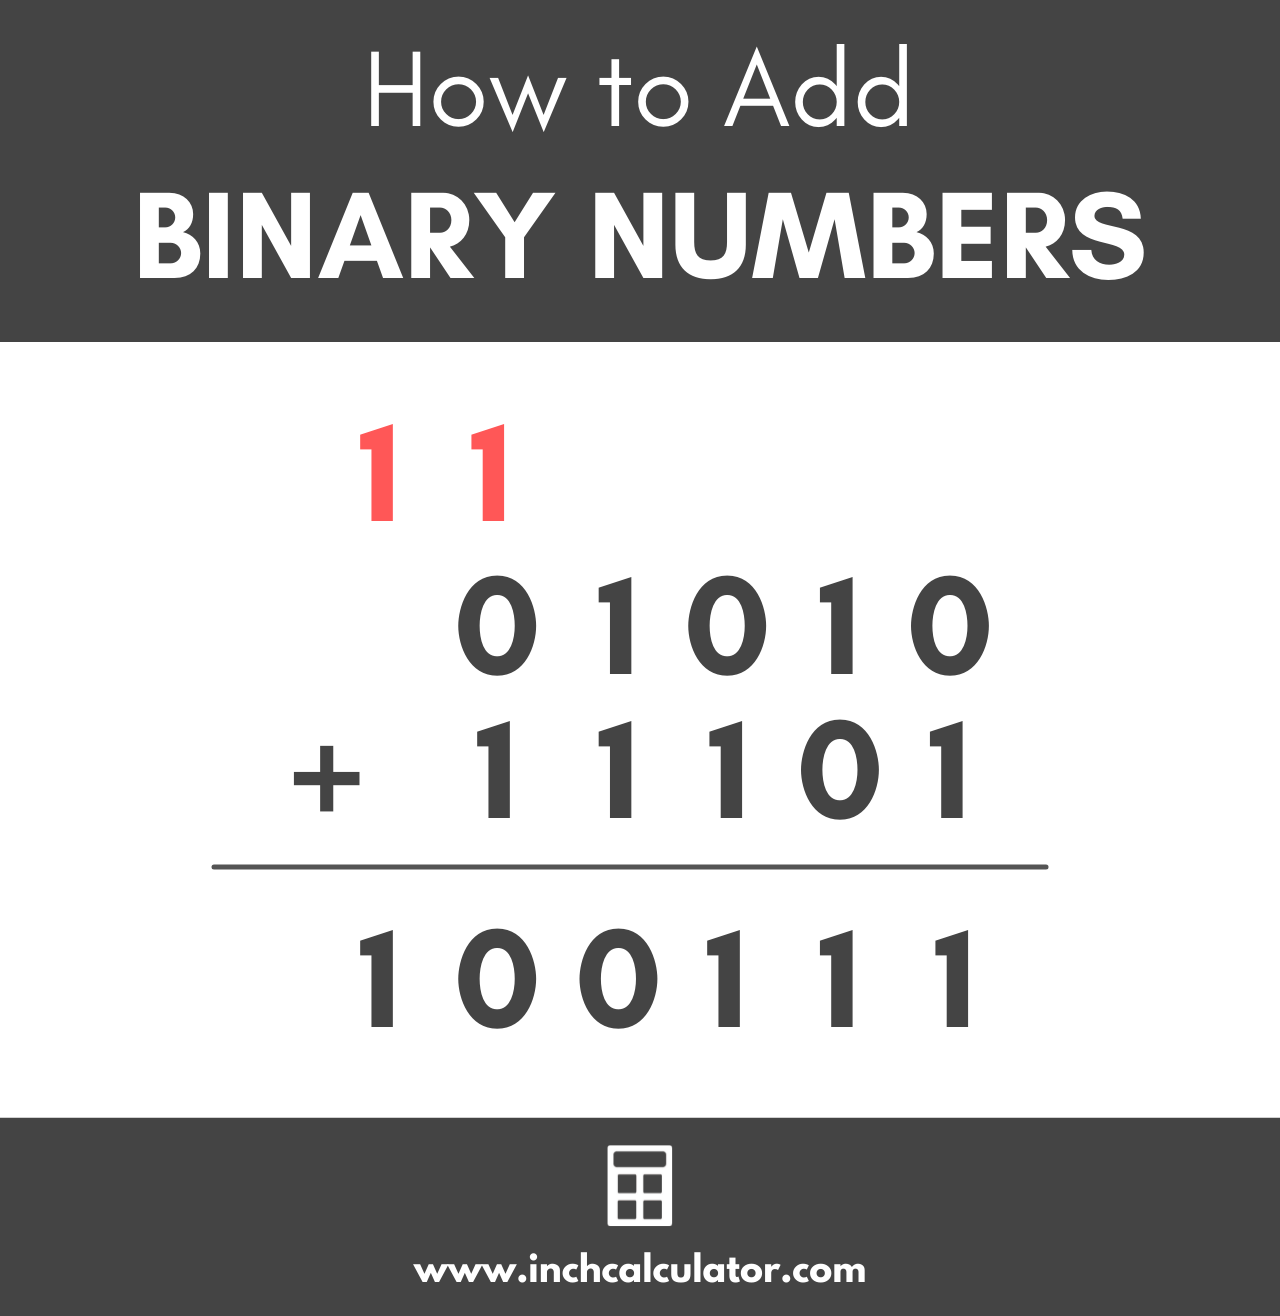 graphic showing how to add binary numbers together